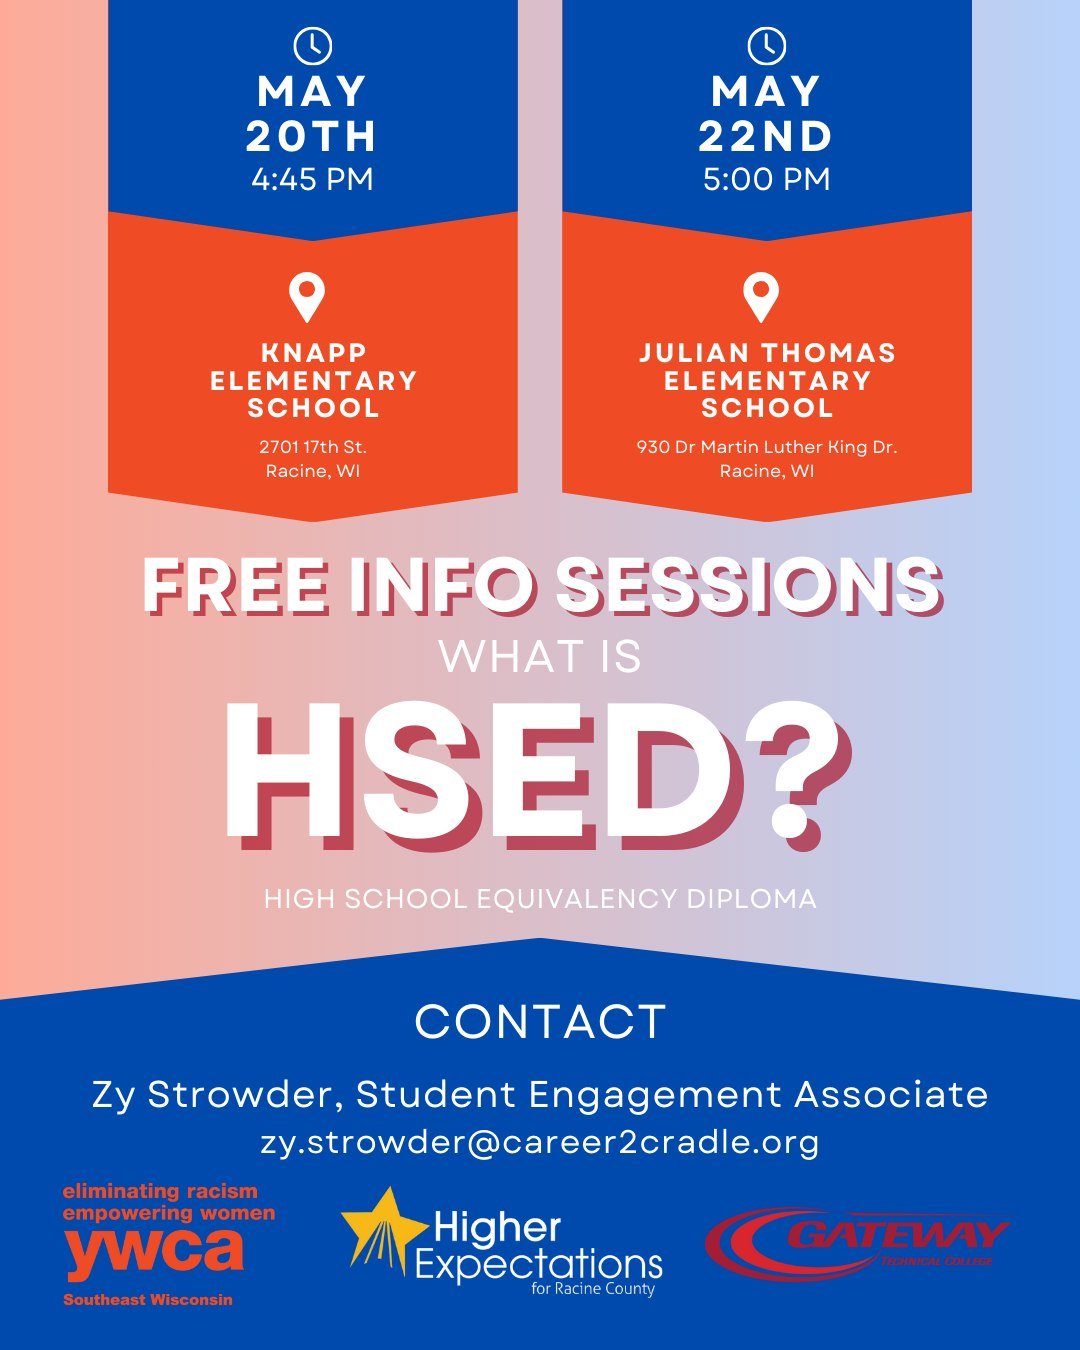 🎓 Curious about the High School Equivalency Diploma (HSED)? Join us next week for an info session with our student engagement associate, Zy Strowder! 

📅Monday, May 20th at 4:45 PM at Knapp Elementary School
📅Wednesday, May 22nd at 5:00 PM at Juli